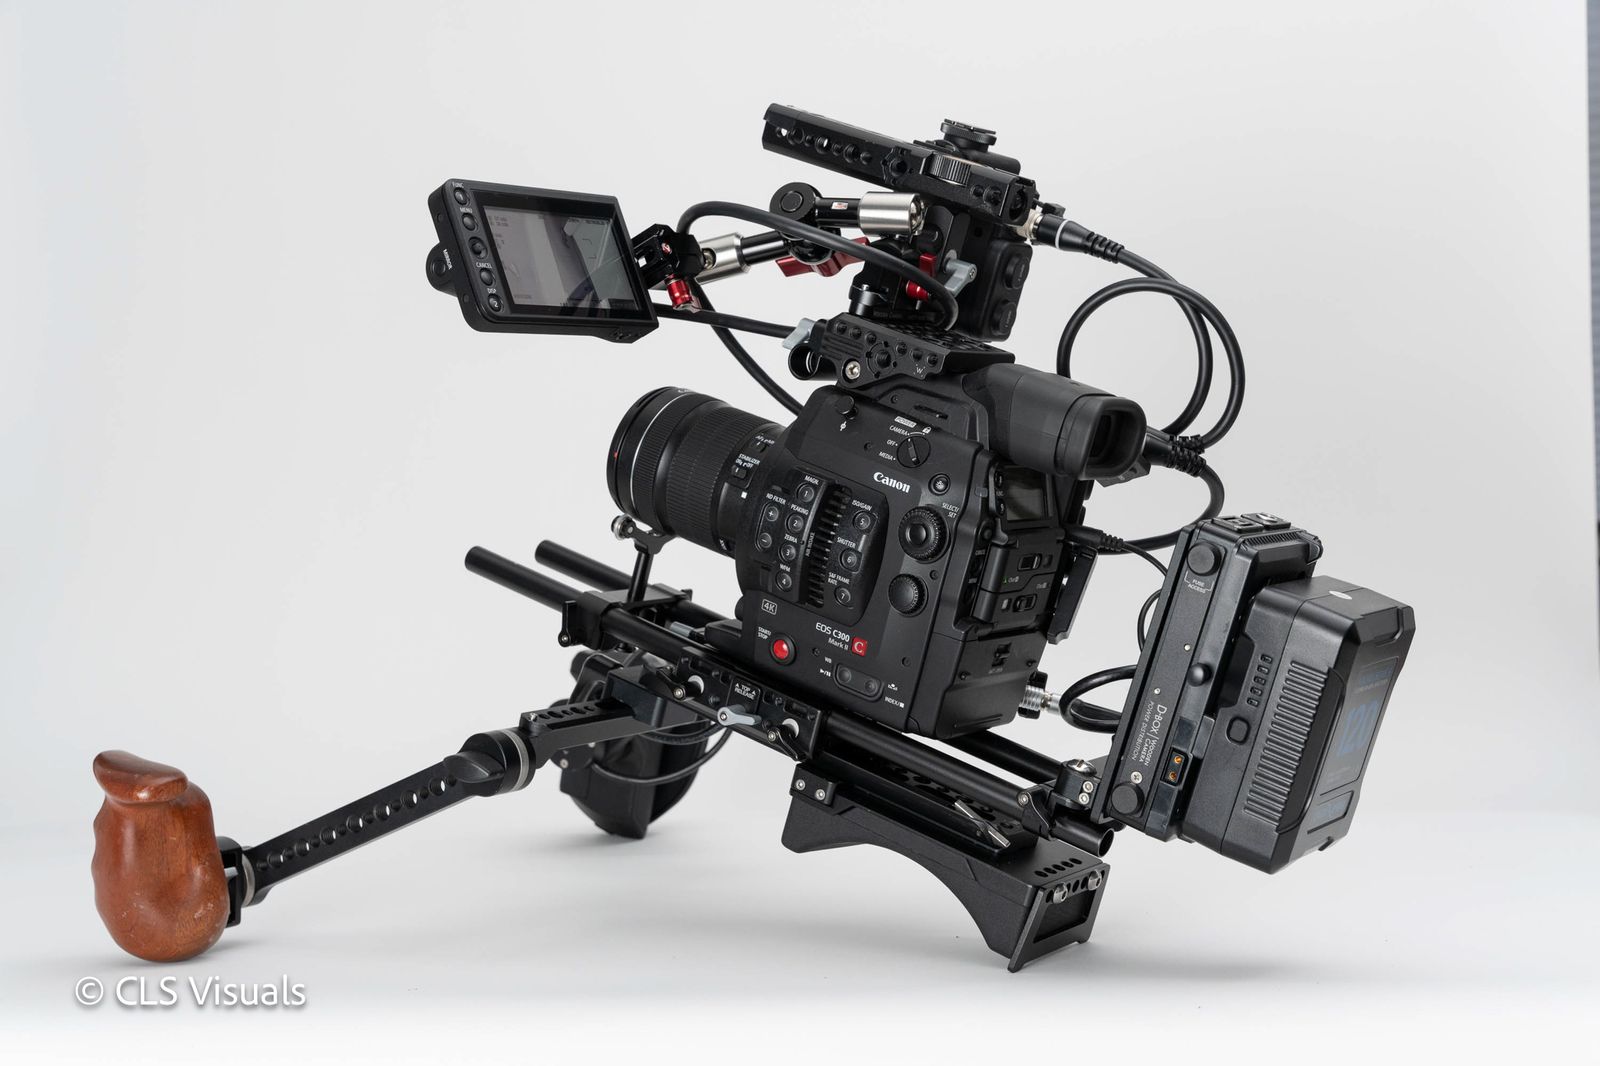 Canon C 300 Mark II with TOUCH FOCUS KIT - 125 HOURS! Complete Rig Package - SUPER CLEAN - NETFLIX Approved!